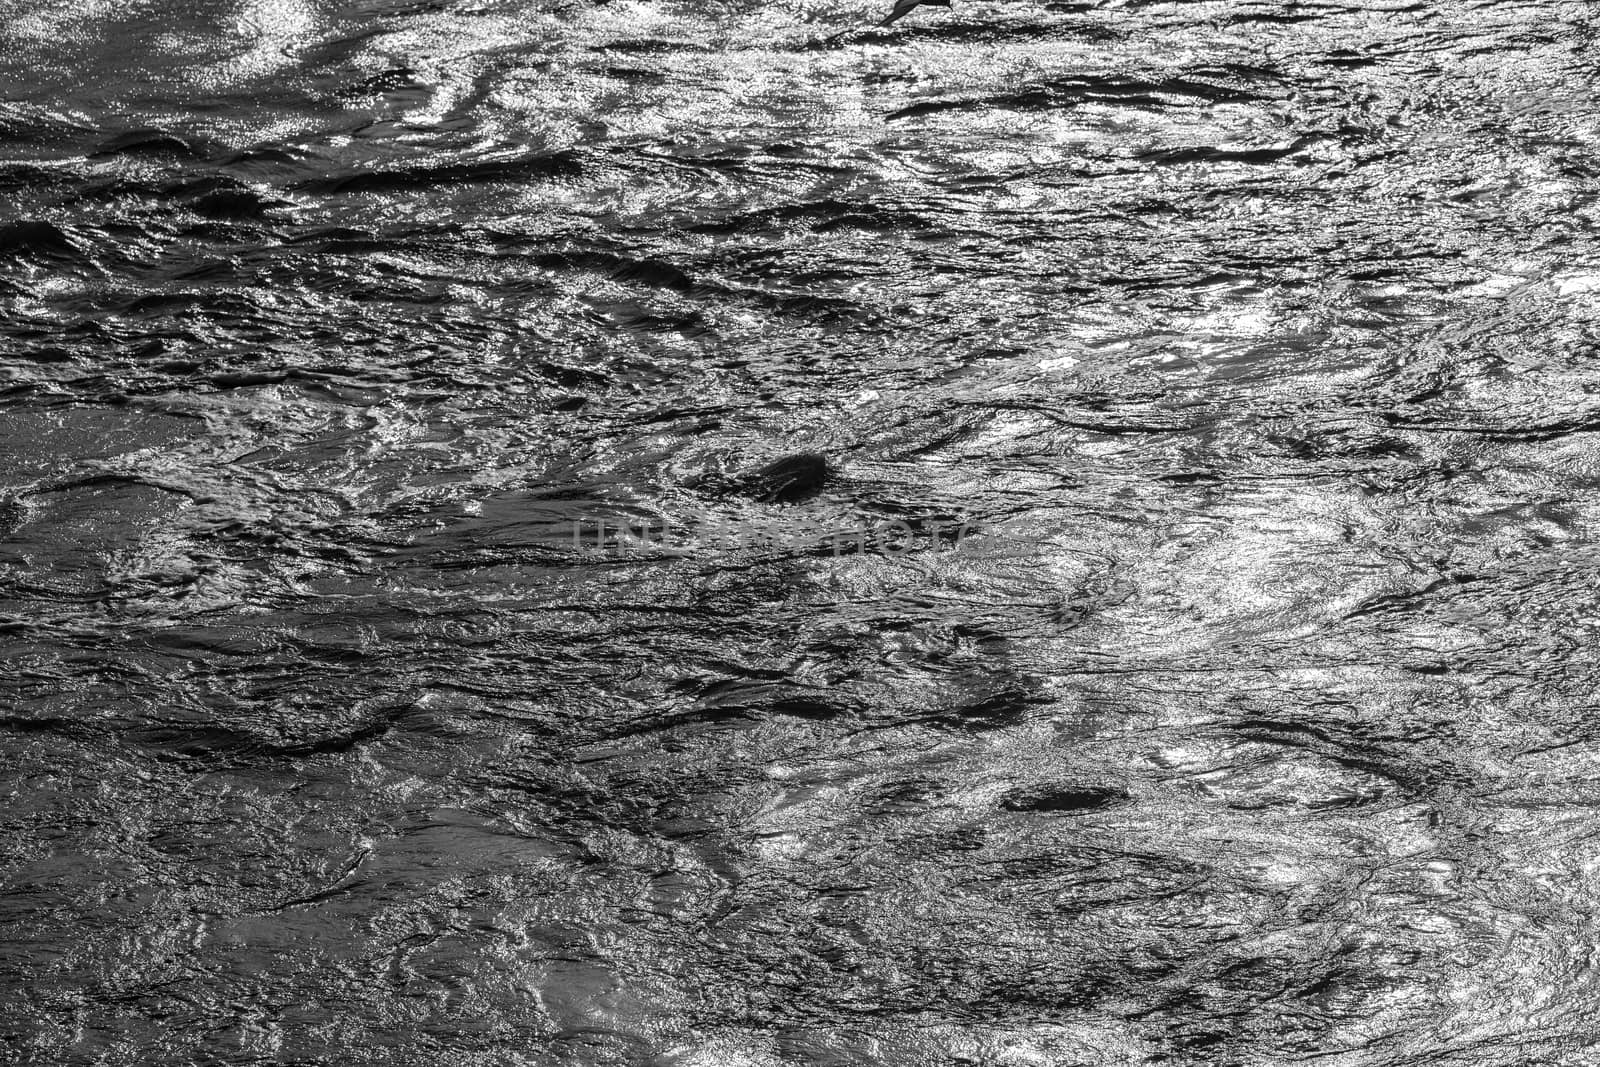 Abstract black and white pictures of wavy sea 
 by Tofotografie